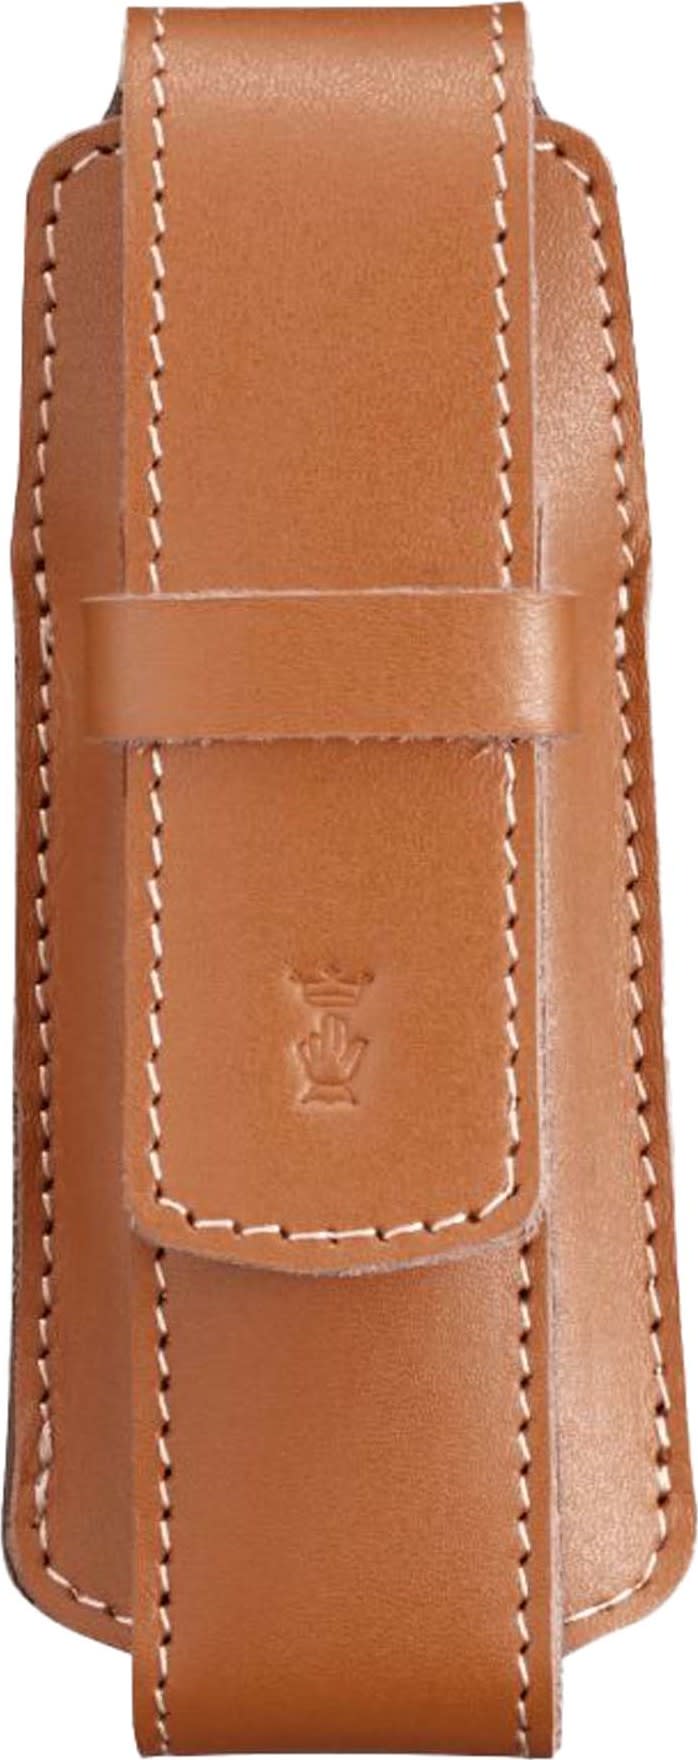 OPINEL Leather Sheath Chic Brown Brown